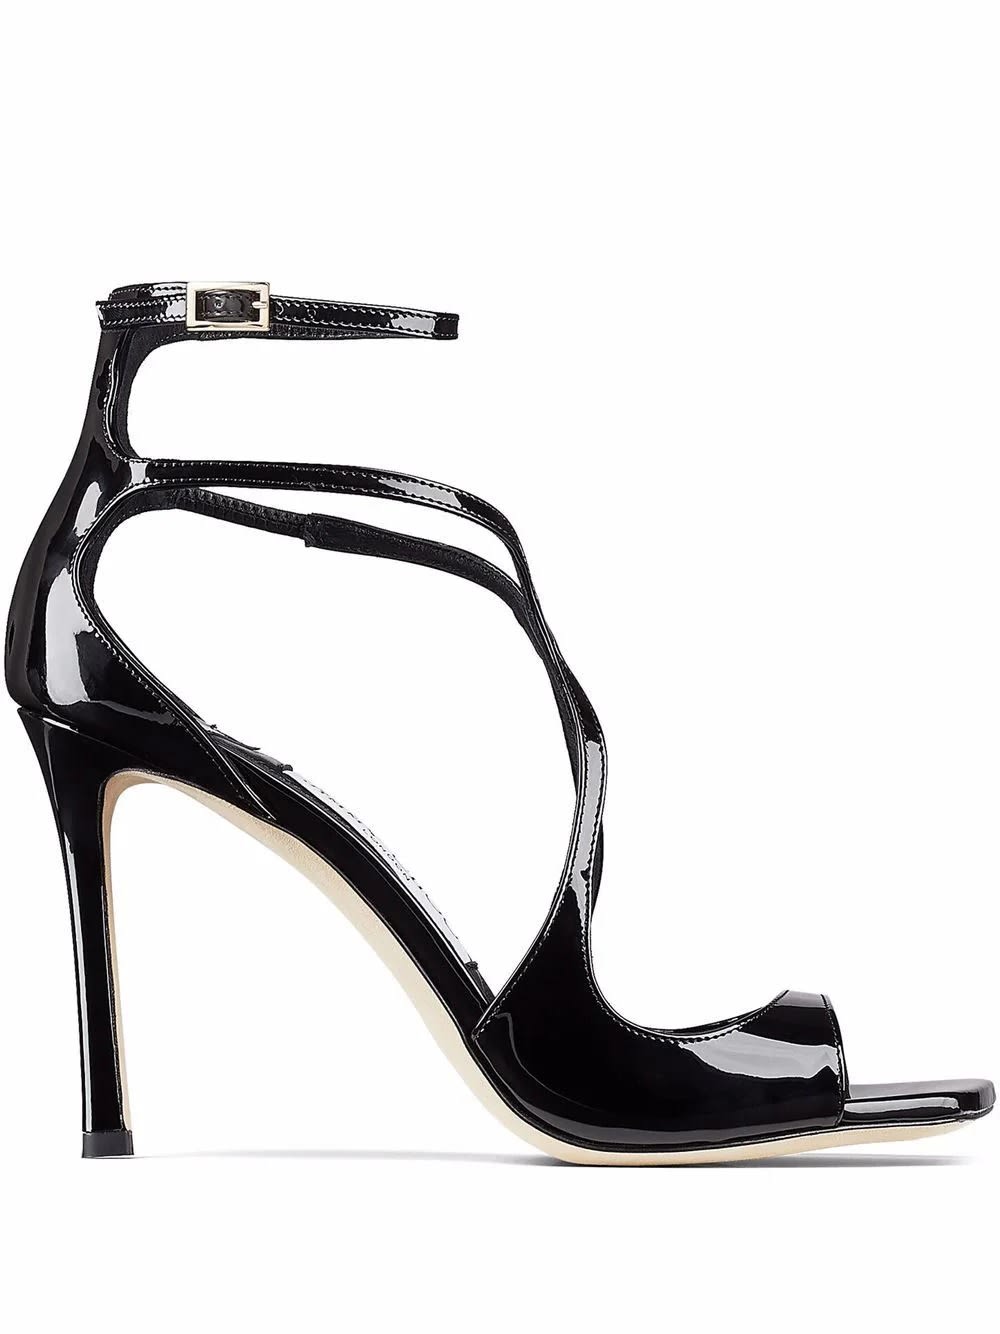 Shop Jimmy Choo Azia Sandals In Black Patent Leather